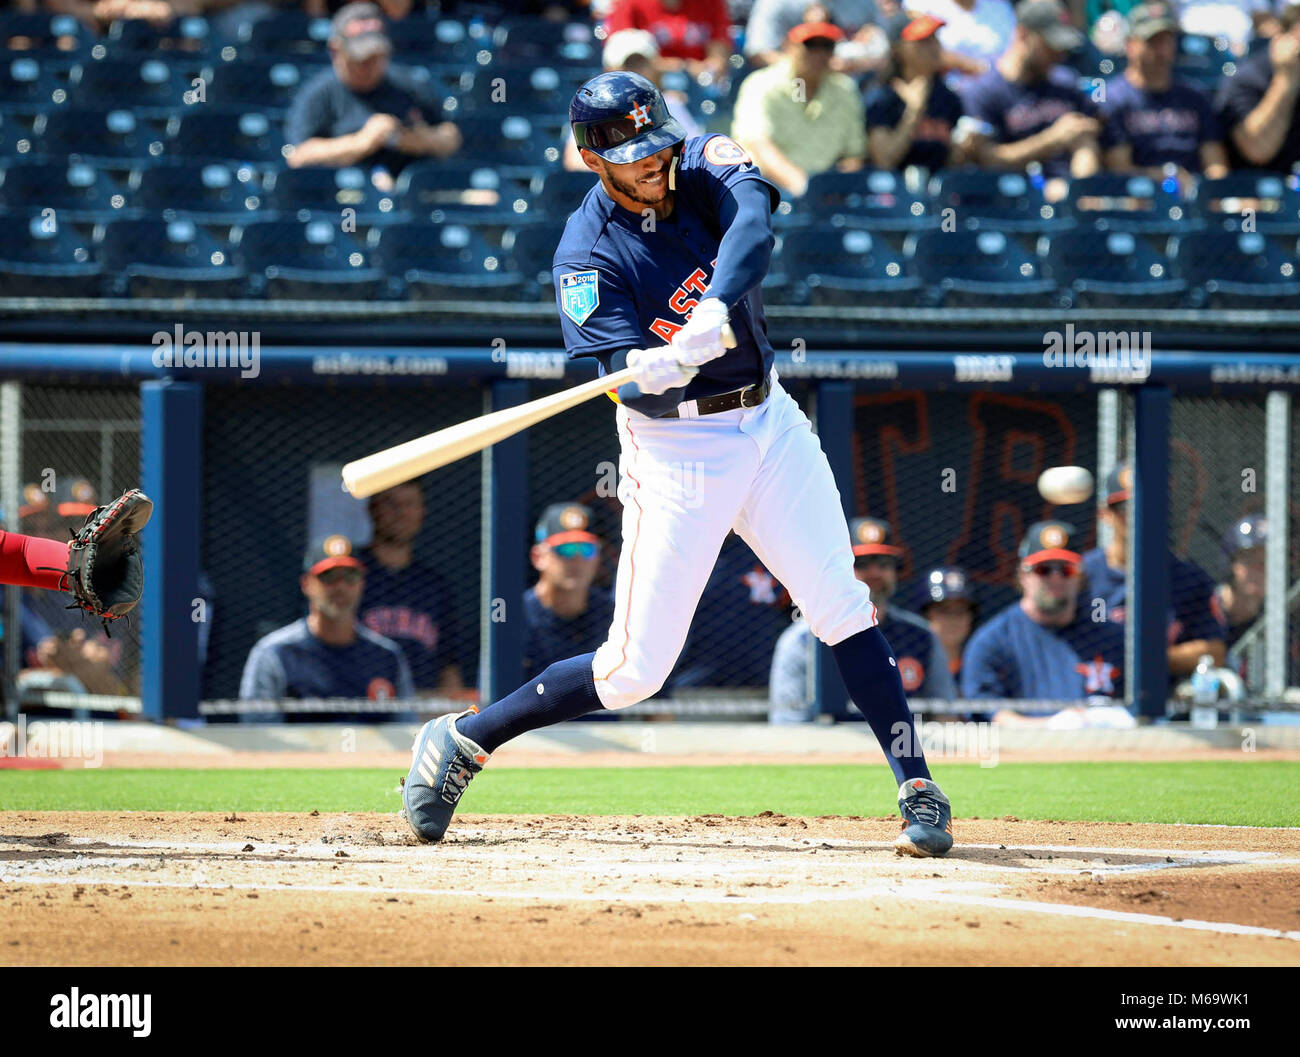 Palm Beach, Florida, USA. 1st Mar, 2018. Houston Astros' #1 CARLOS CORREA swings at a pitch during a spring training game between the Houston Astros and Boston Red Sox at the Ballpark of the Palm Beaches. Credit: Bruce R. Bennett/The Palm Beach Post/ZUMA Wire/Alamy Live News Stock Photo